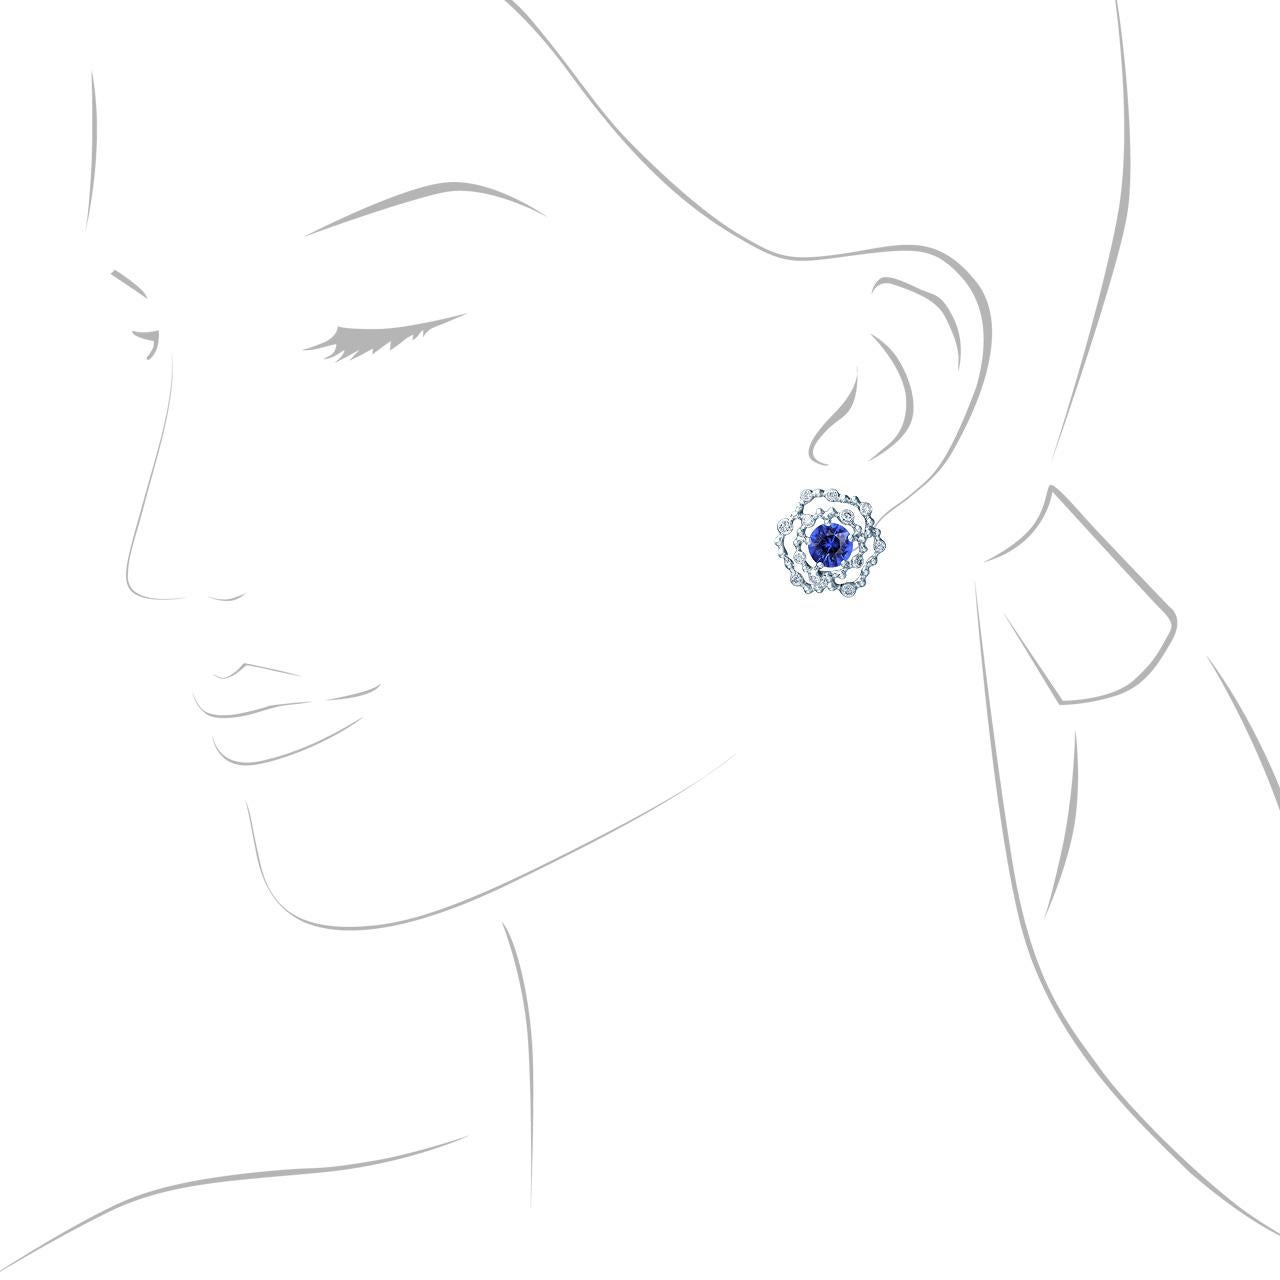 - 24 Round Diamonds - 0.43 ct, G/VVS1-VS1
- 2 Round Sapphires - 2.46 ct
- 18K White Gold 
- Weight: 6.31 g
These elegant earrings from the Byzantium collection is adorned with 2.46 carat sapphires surrounded by diamonds on gold lace. The dazzling